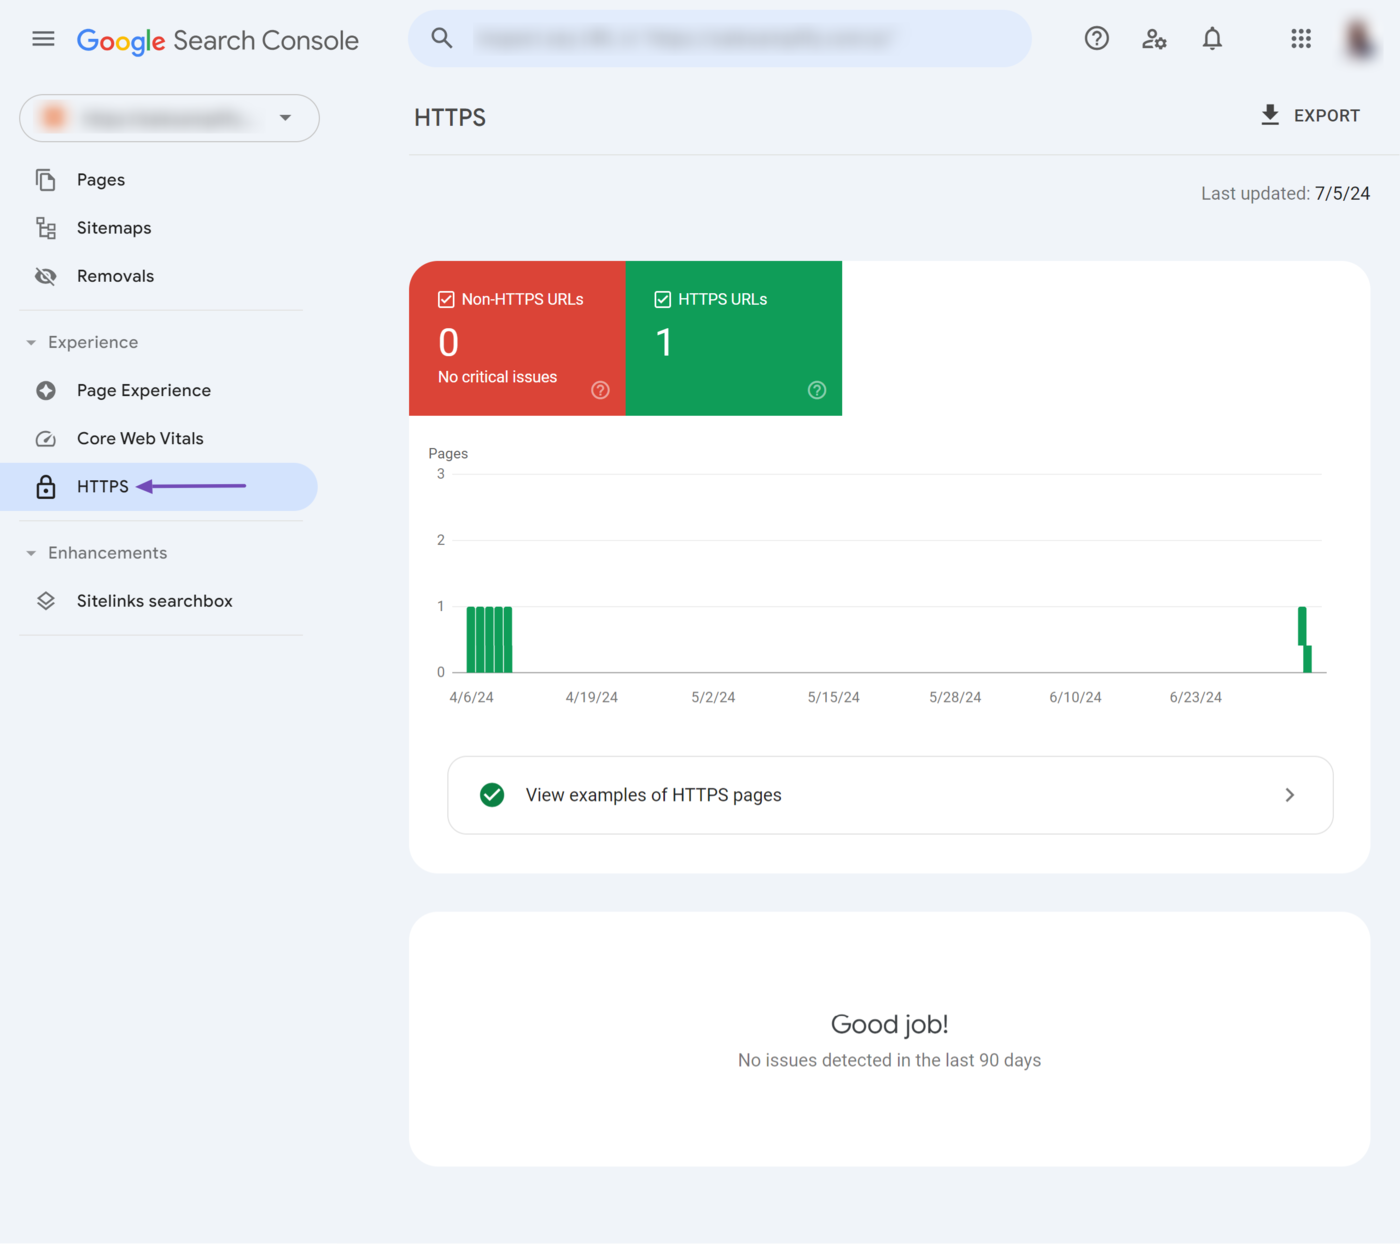 Overview of the HTTPS report in Google Search Console